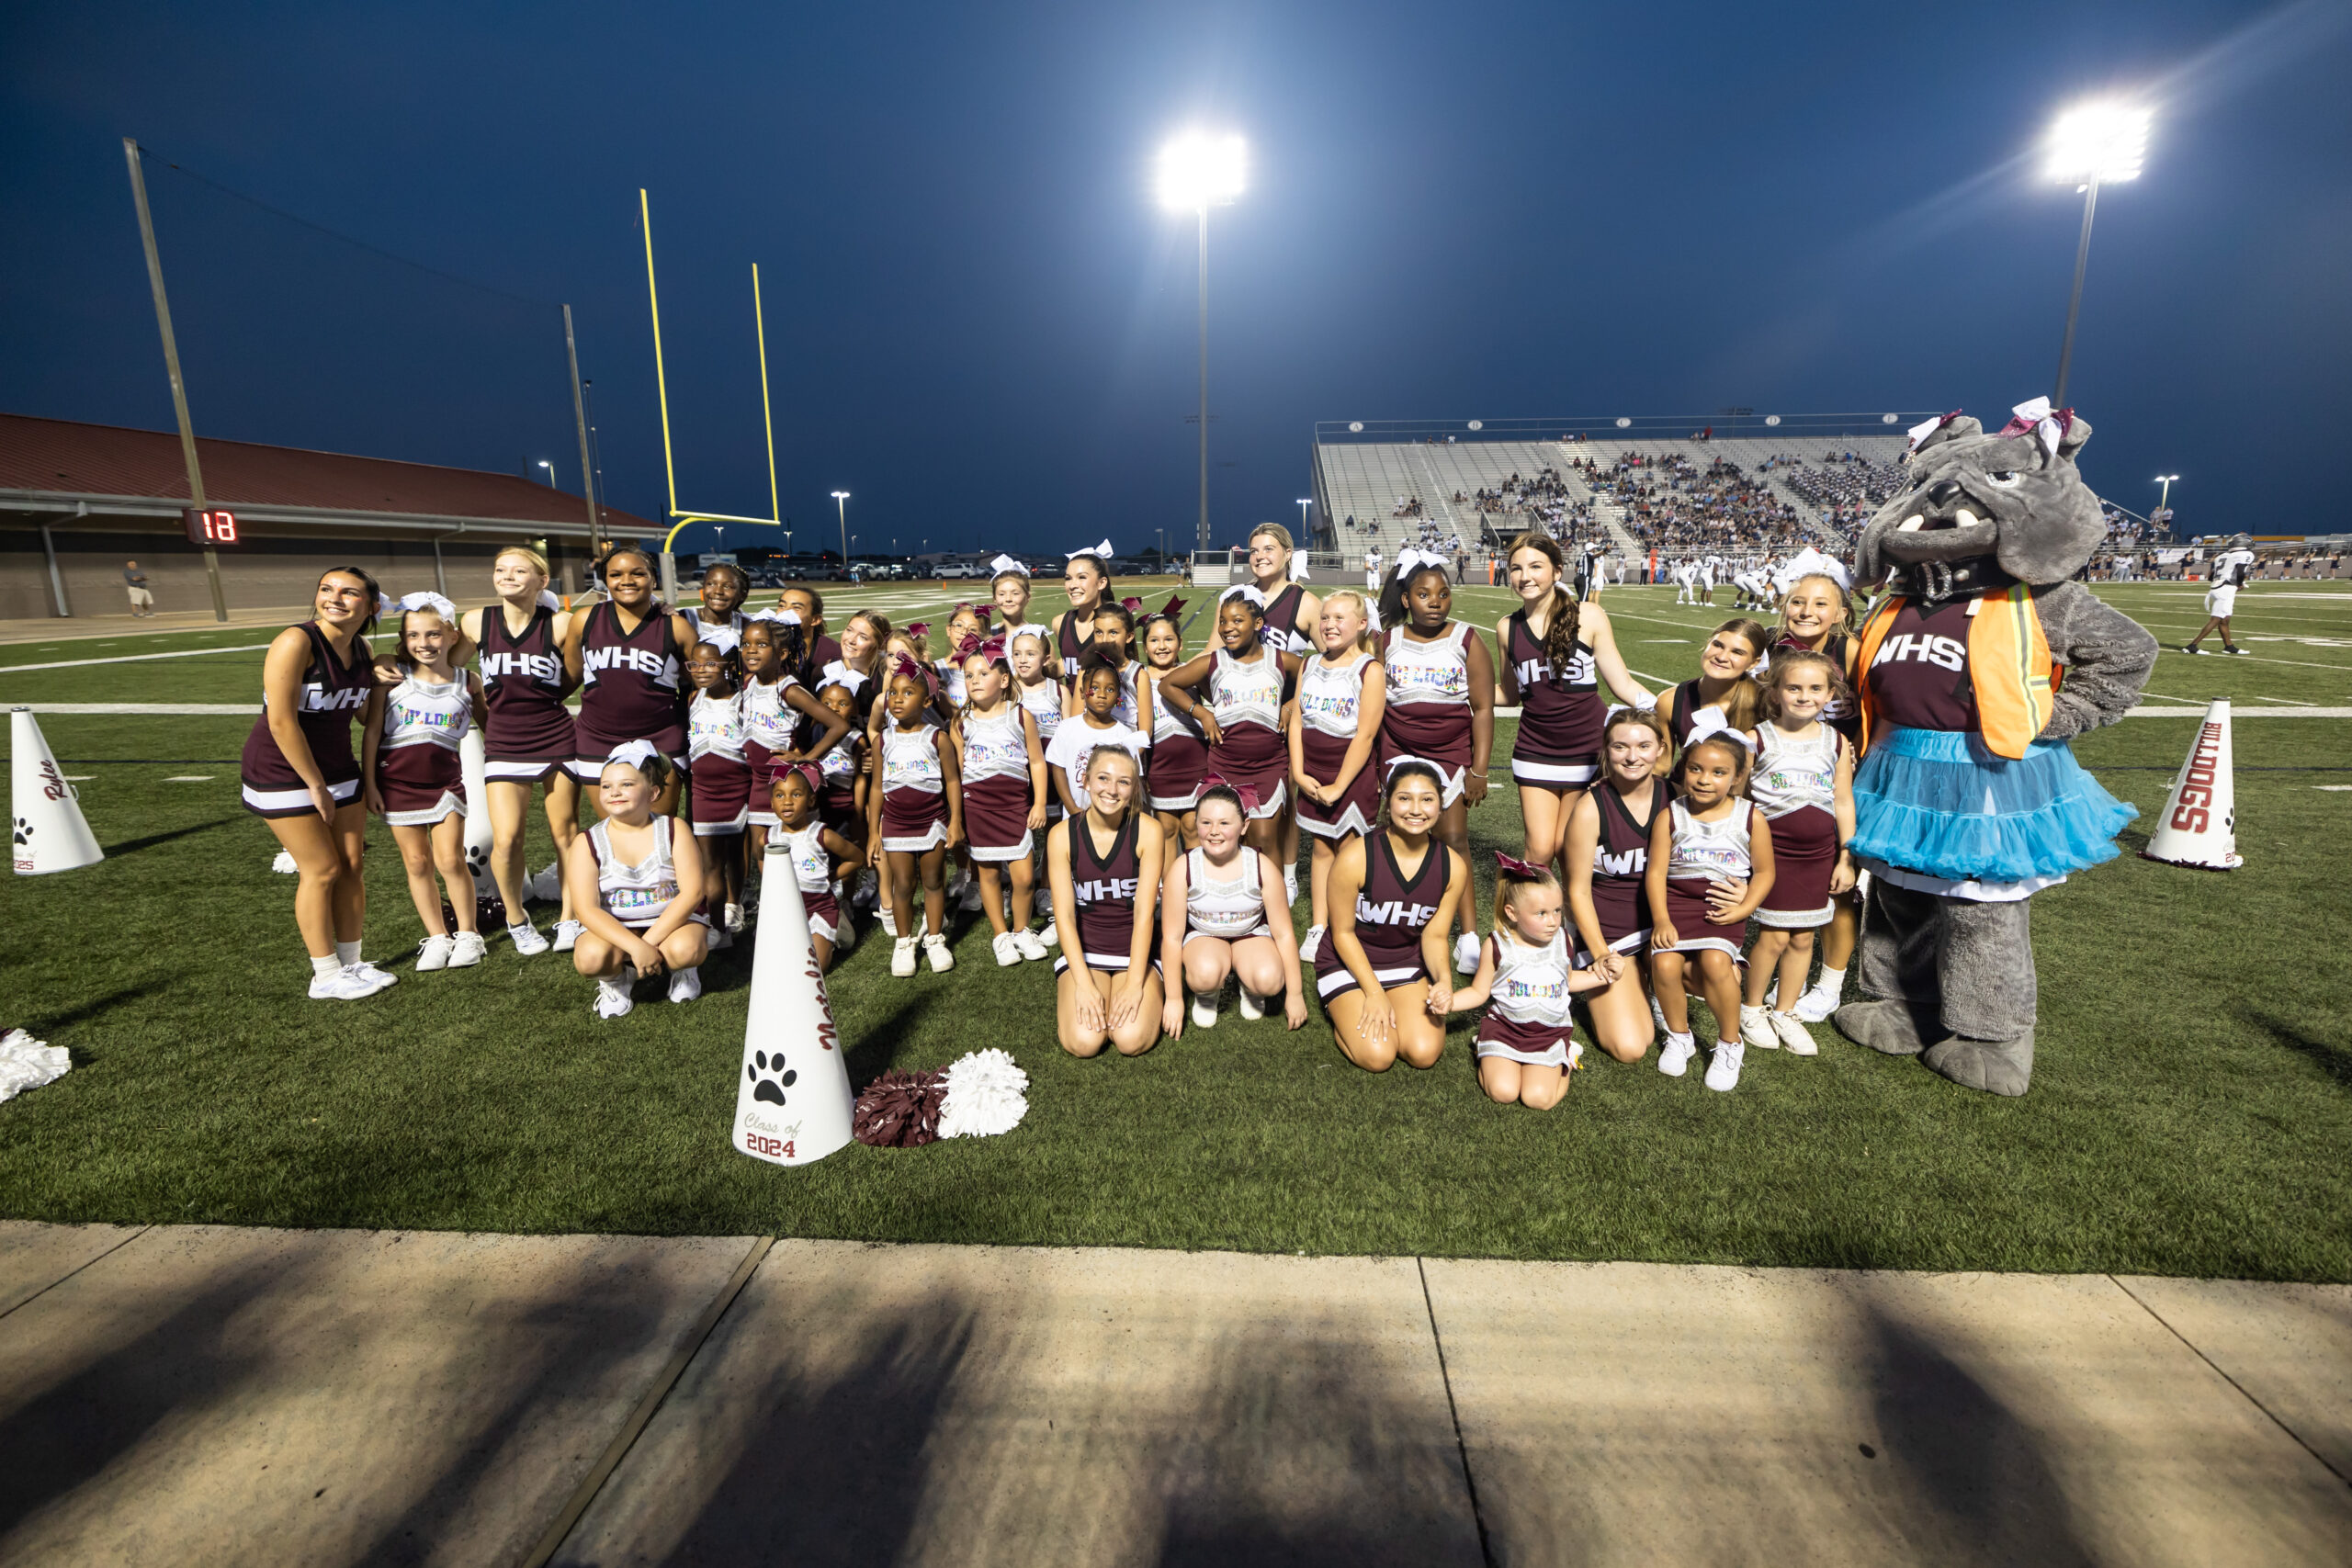 The Waller High School cheerleaders and the Waller PeeWee Football Association cheerleaders group together during the varsity football season opener Friday night. The Waller Bulldog varsity team battles the Bryan Vikings, with the 21-6 decision favoring the Vikings. The Bulldogs next game will be against Mayde Creek in Katy ISD's Legacy Stadium. (photo courtesy RoninVisuals.com)